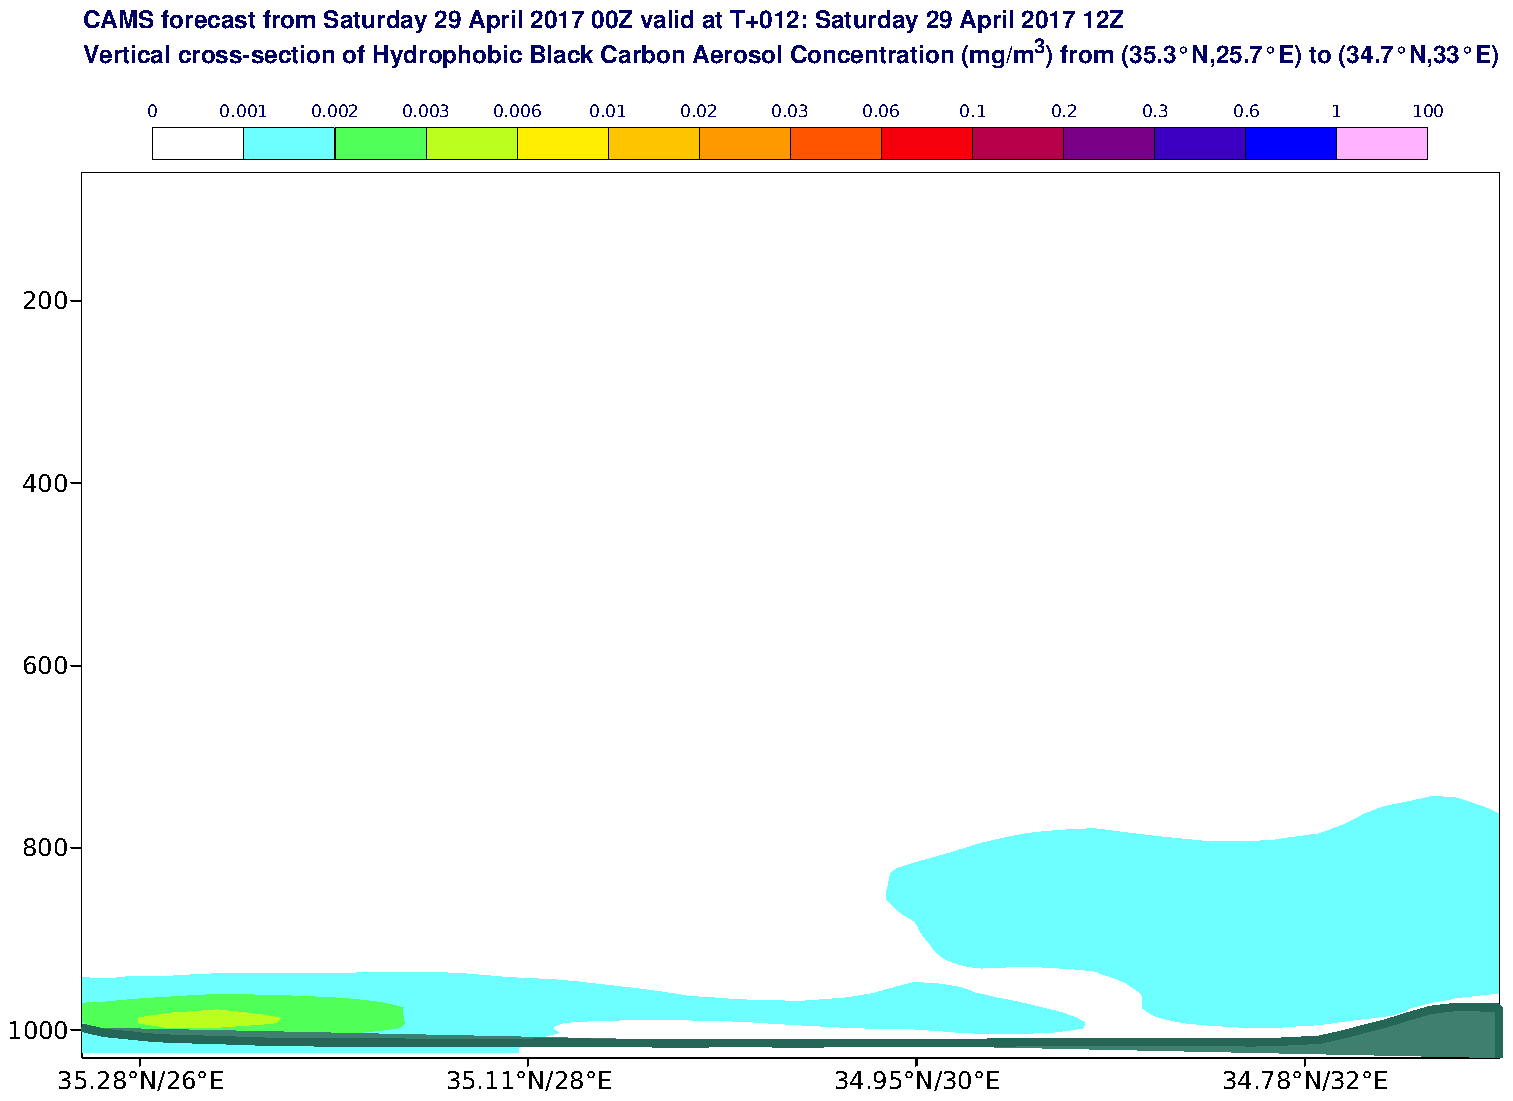 Vertical cross-section of Hydrophobic Black Carbon Aerosol Concentration (mg/m3) valid at T12 - 2017-04-29 12:00